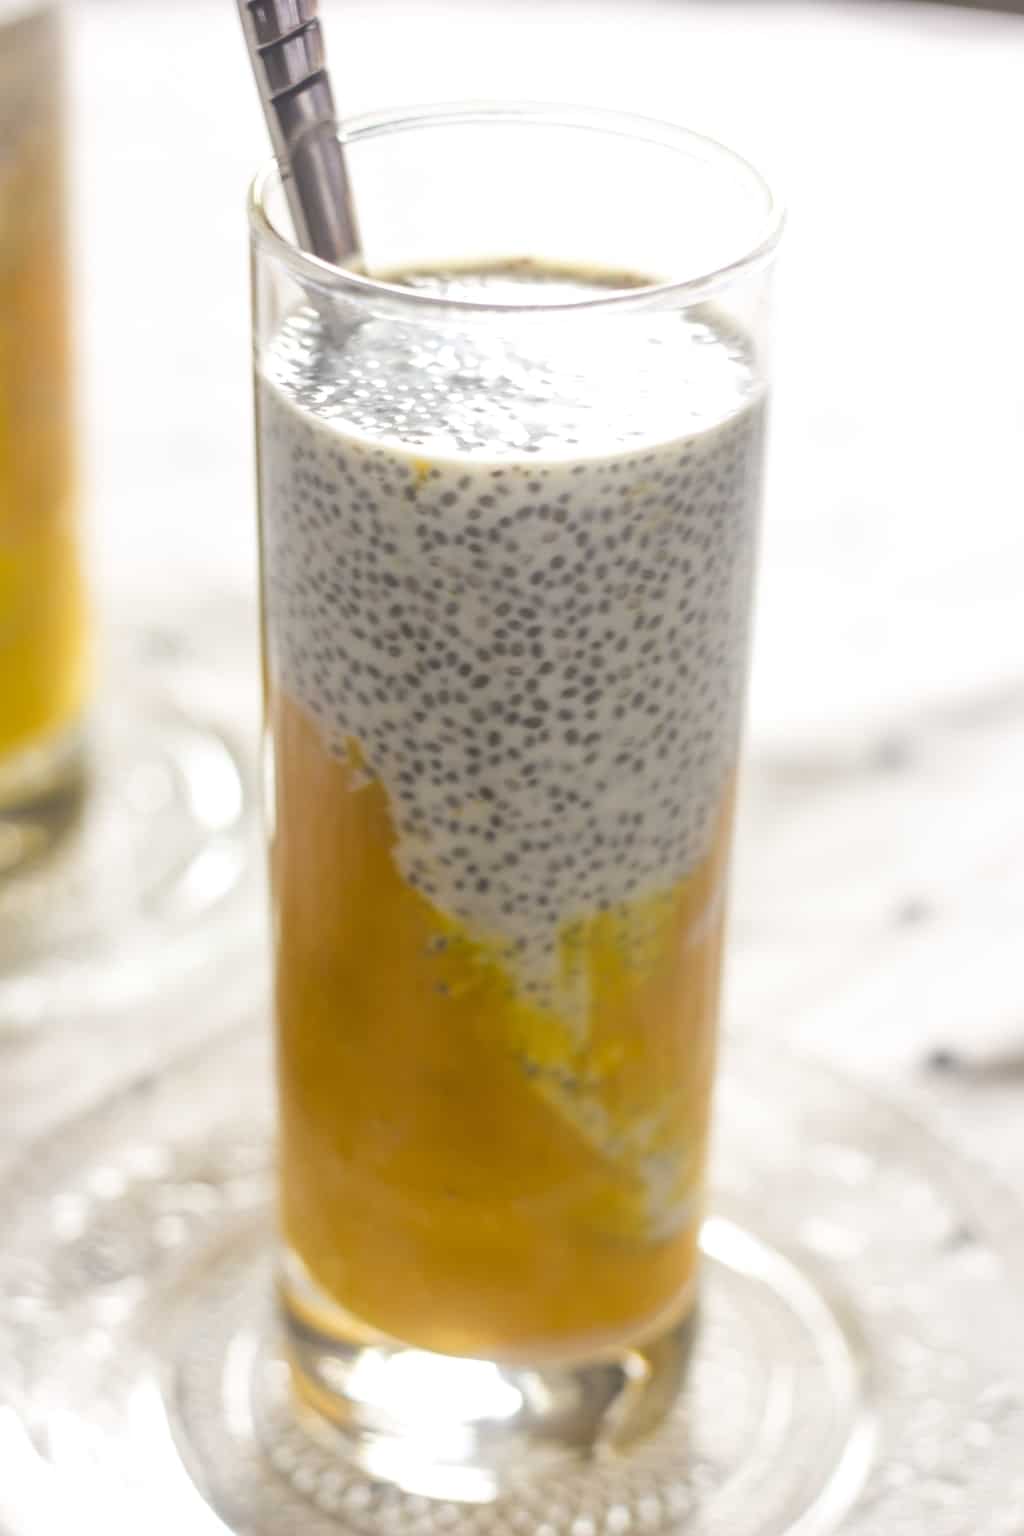 Mango Chia Seed Breakfast Drink | My Food Story | 20 Swoon Worthy Chia Pudding Recipes | Gluten Free, Vegan, and Paleo options